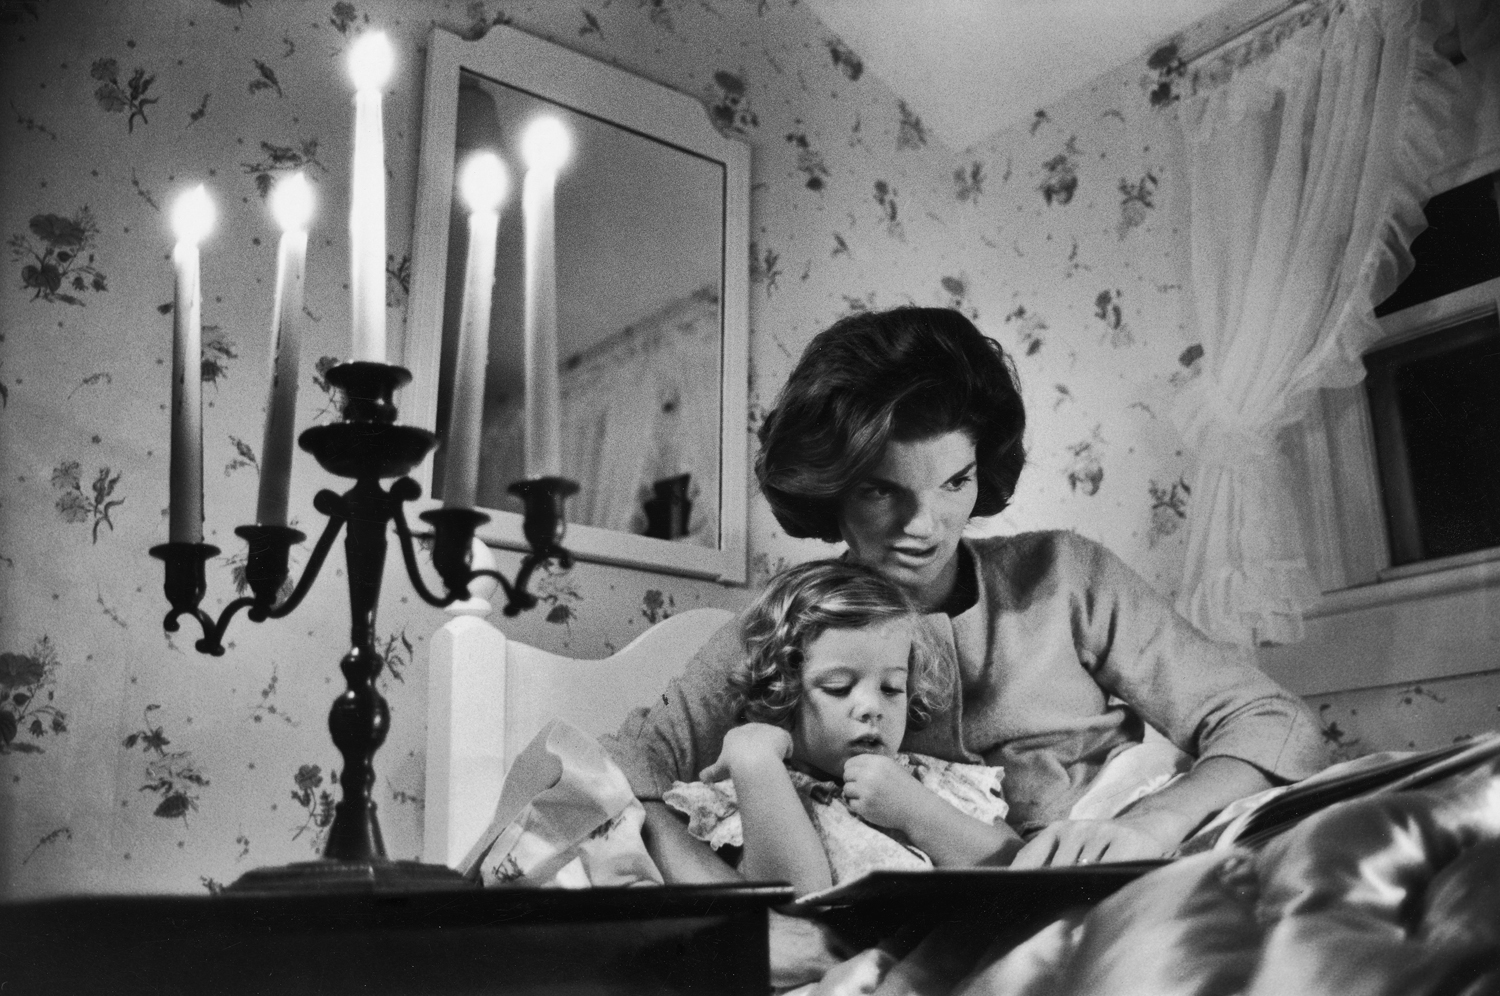 Jackie Kennedy reads to her daughter Caroline at the Kennedy family home in Hyannis Port, Mass., 1960.